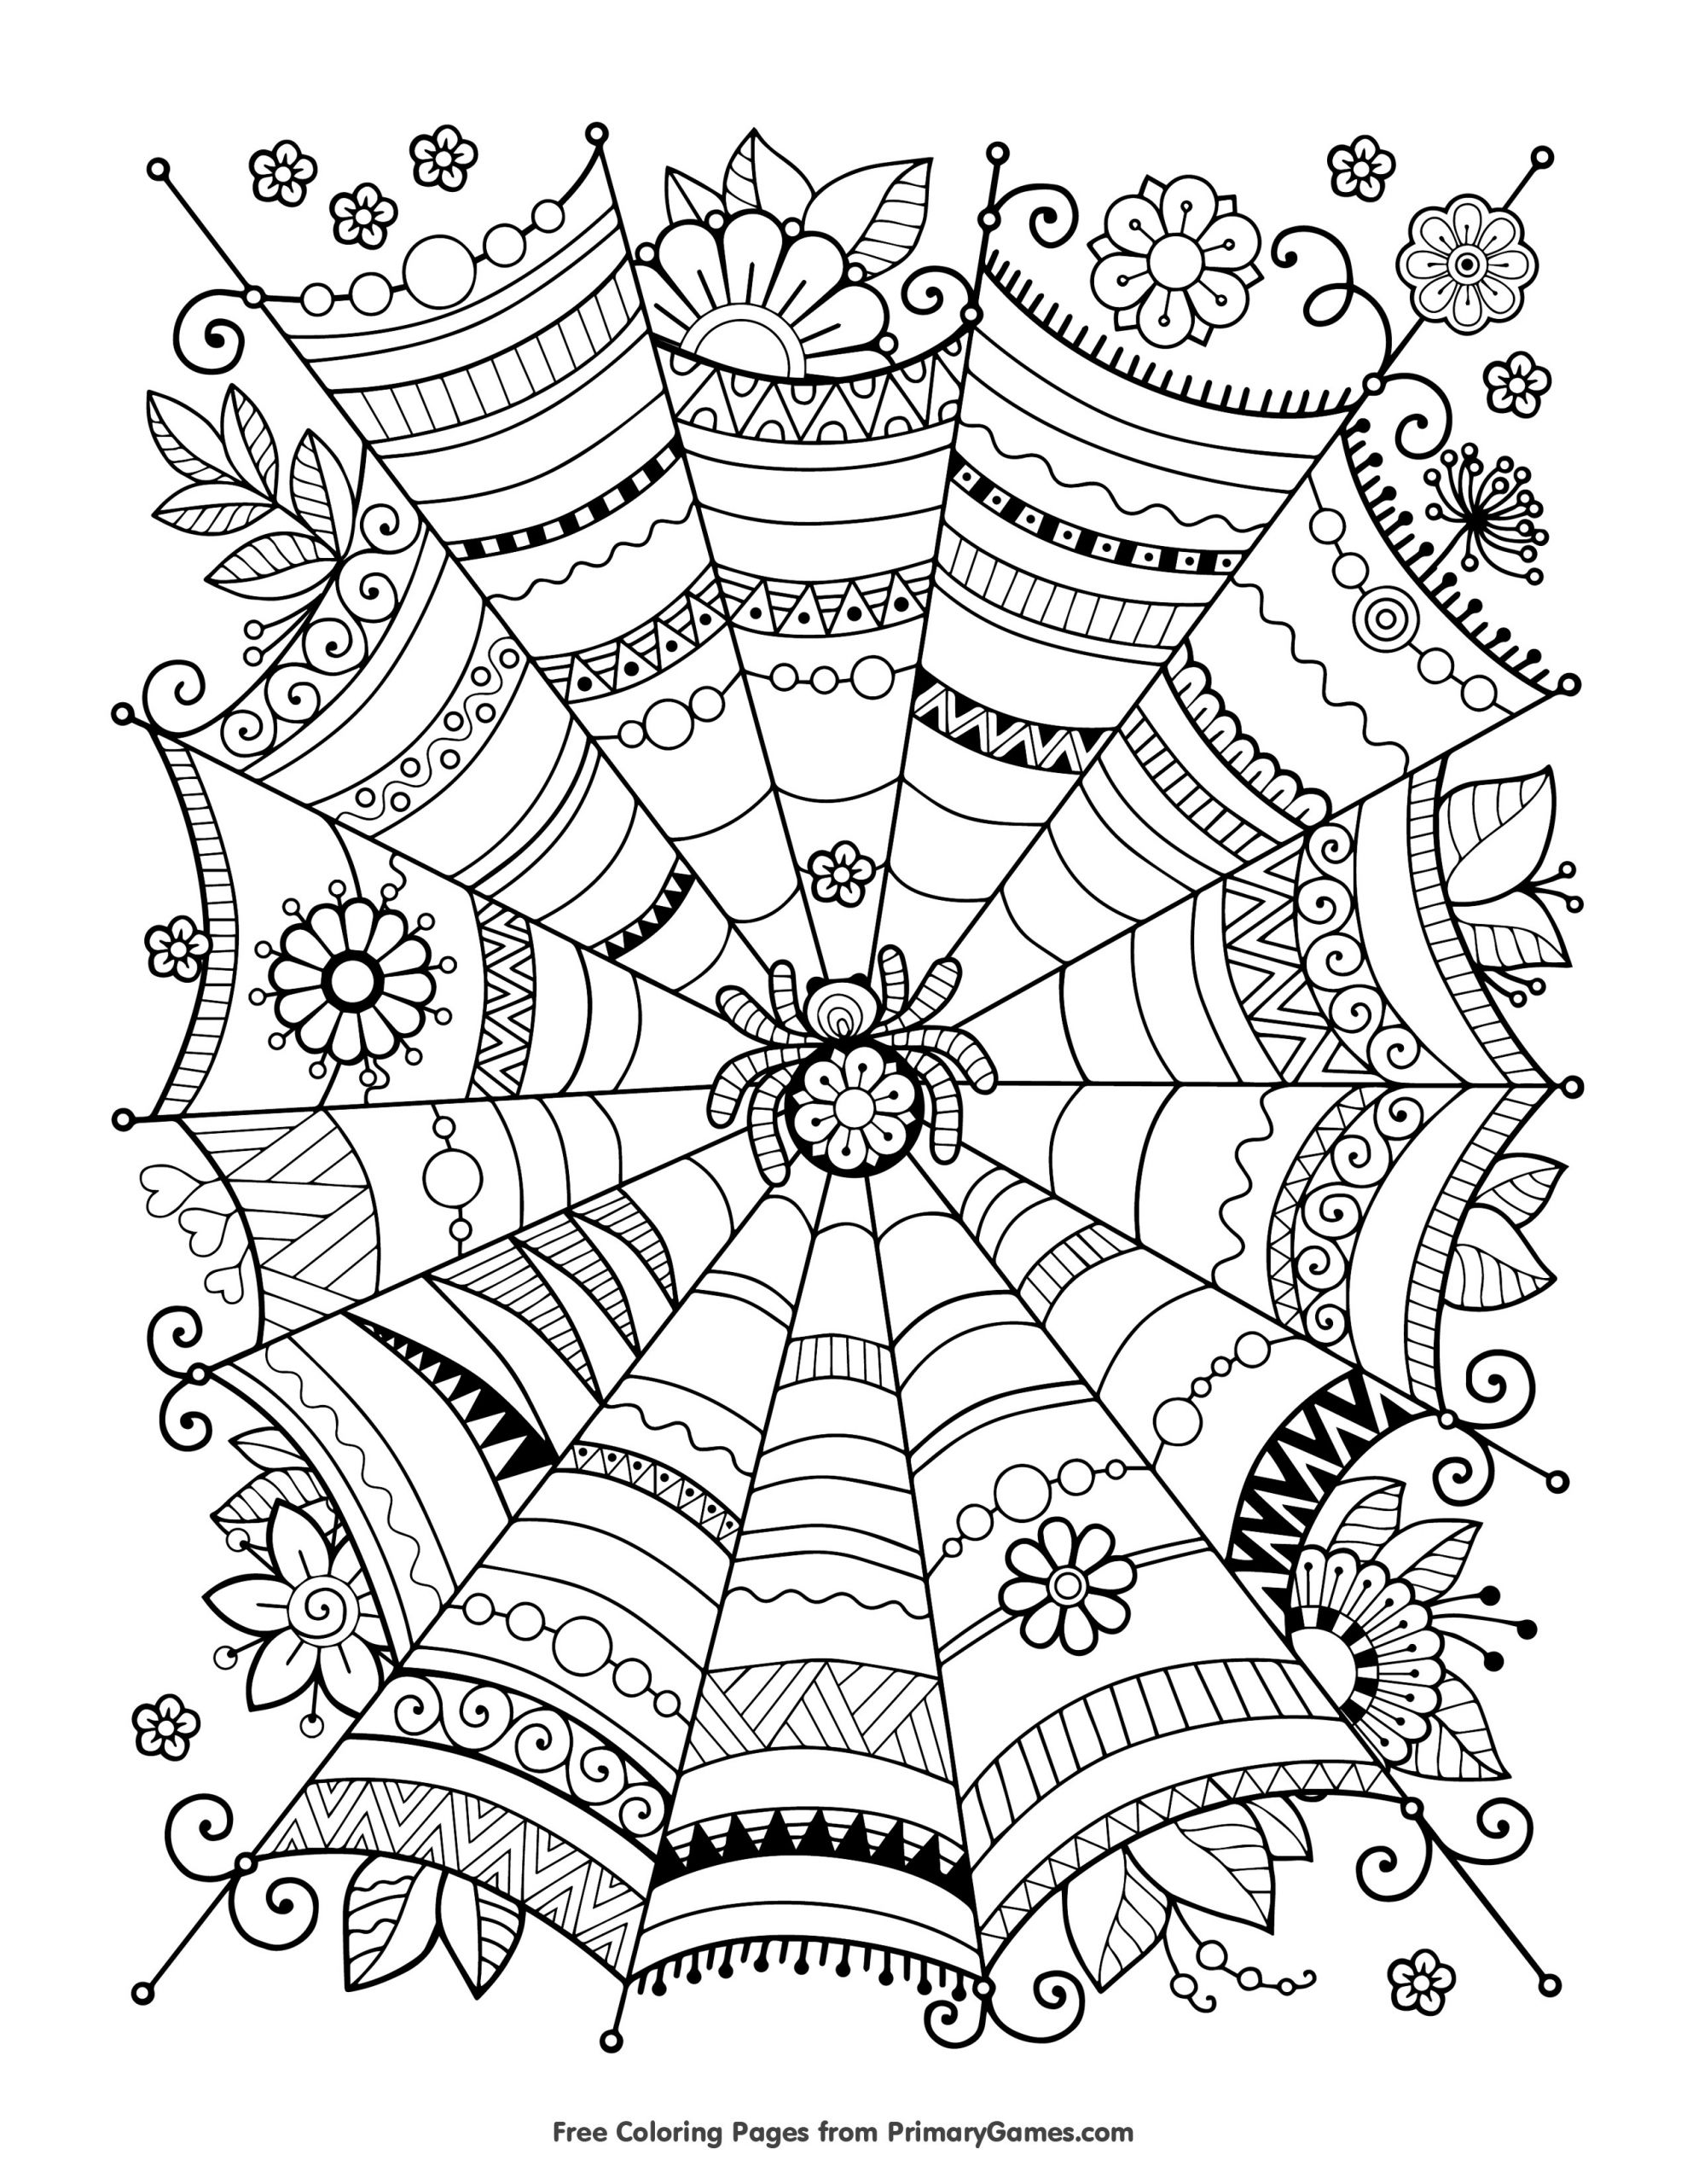 Adult Coloring Pages Halloween
 FREE Halloween Coloring Pages for Adults & Kids